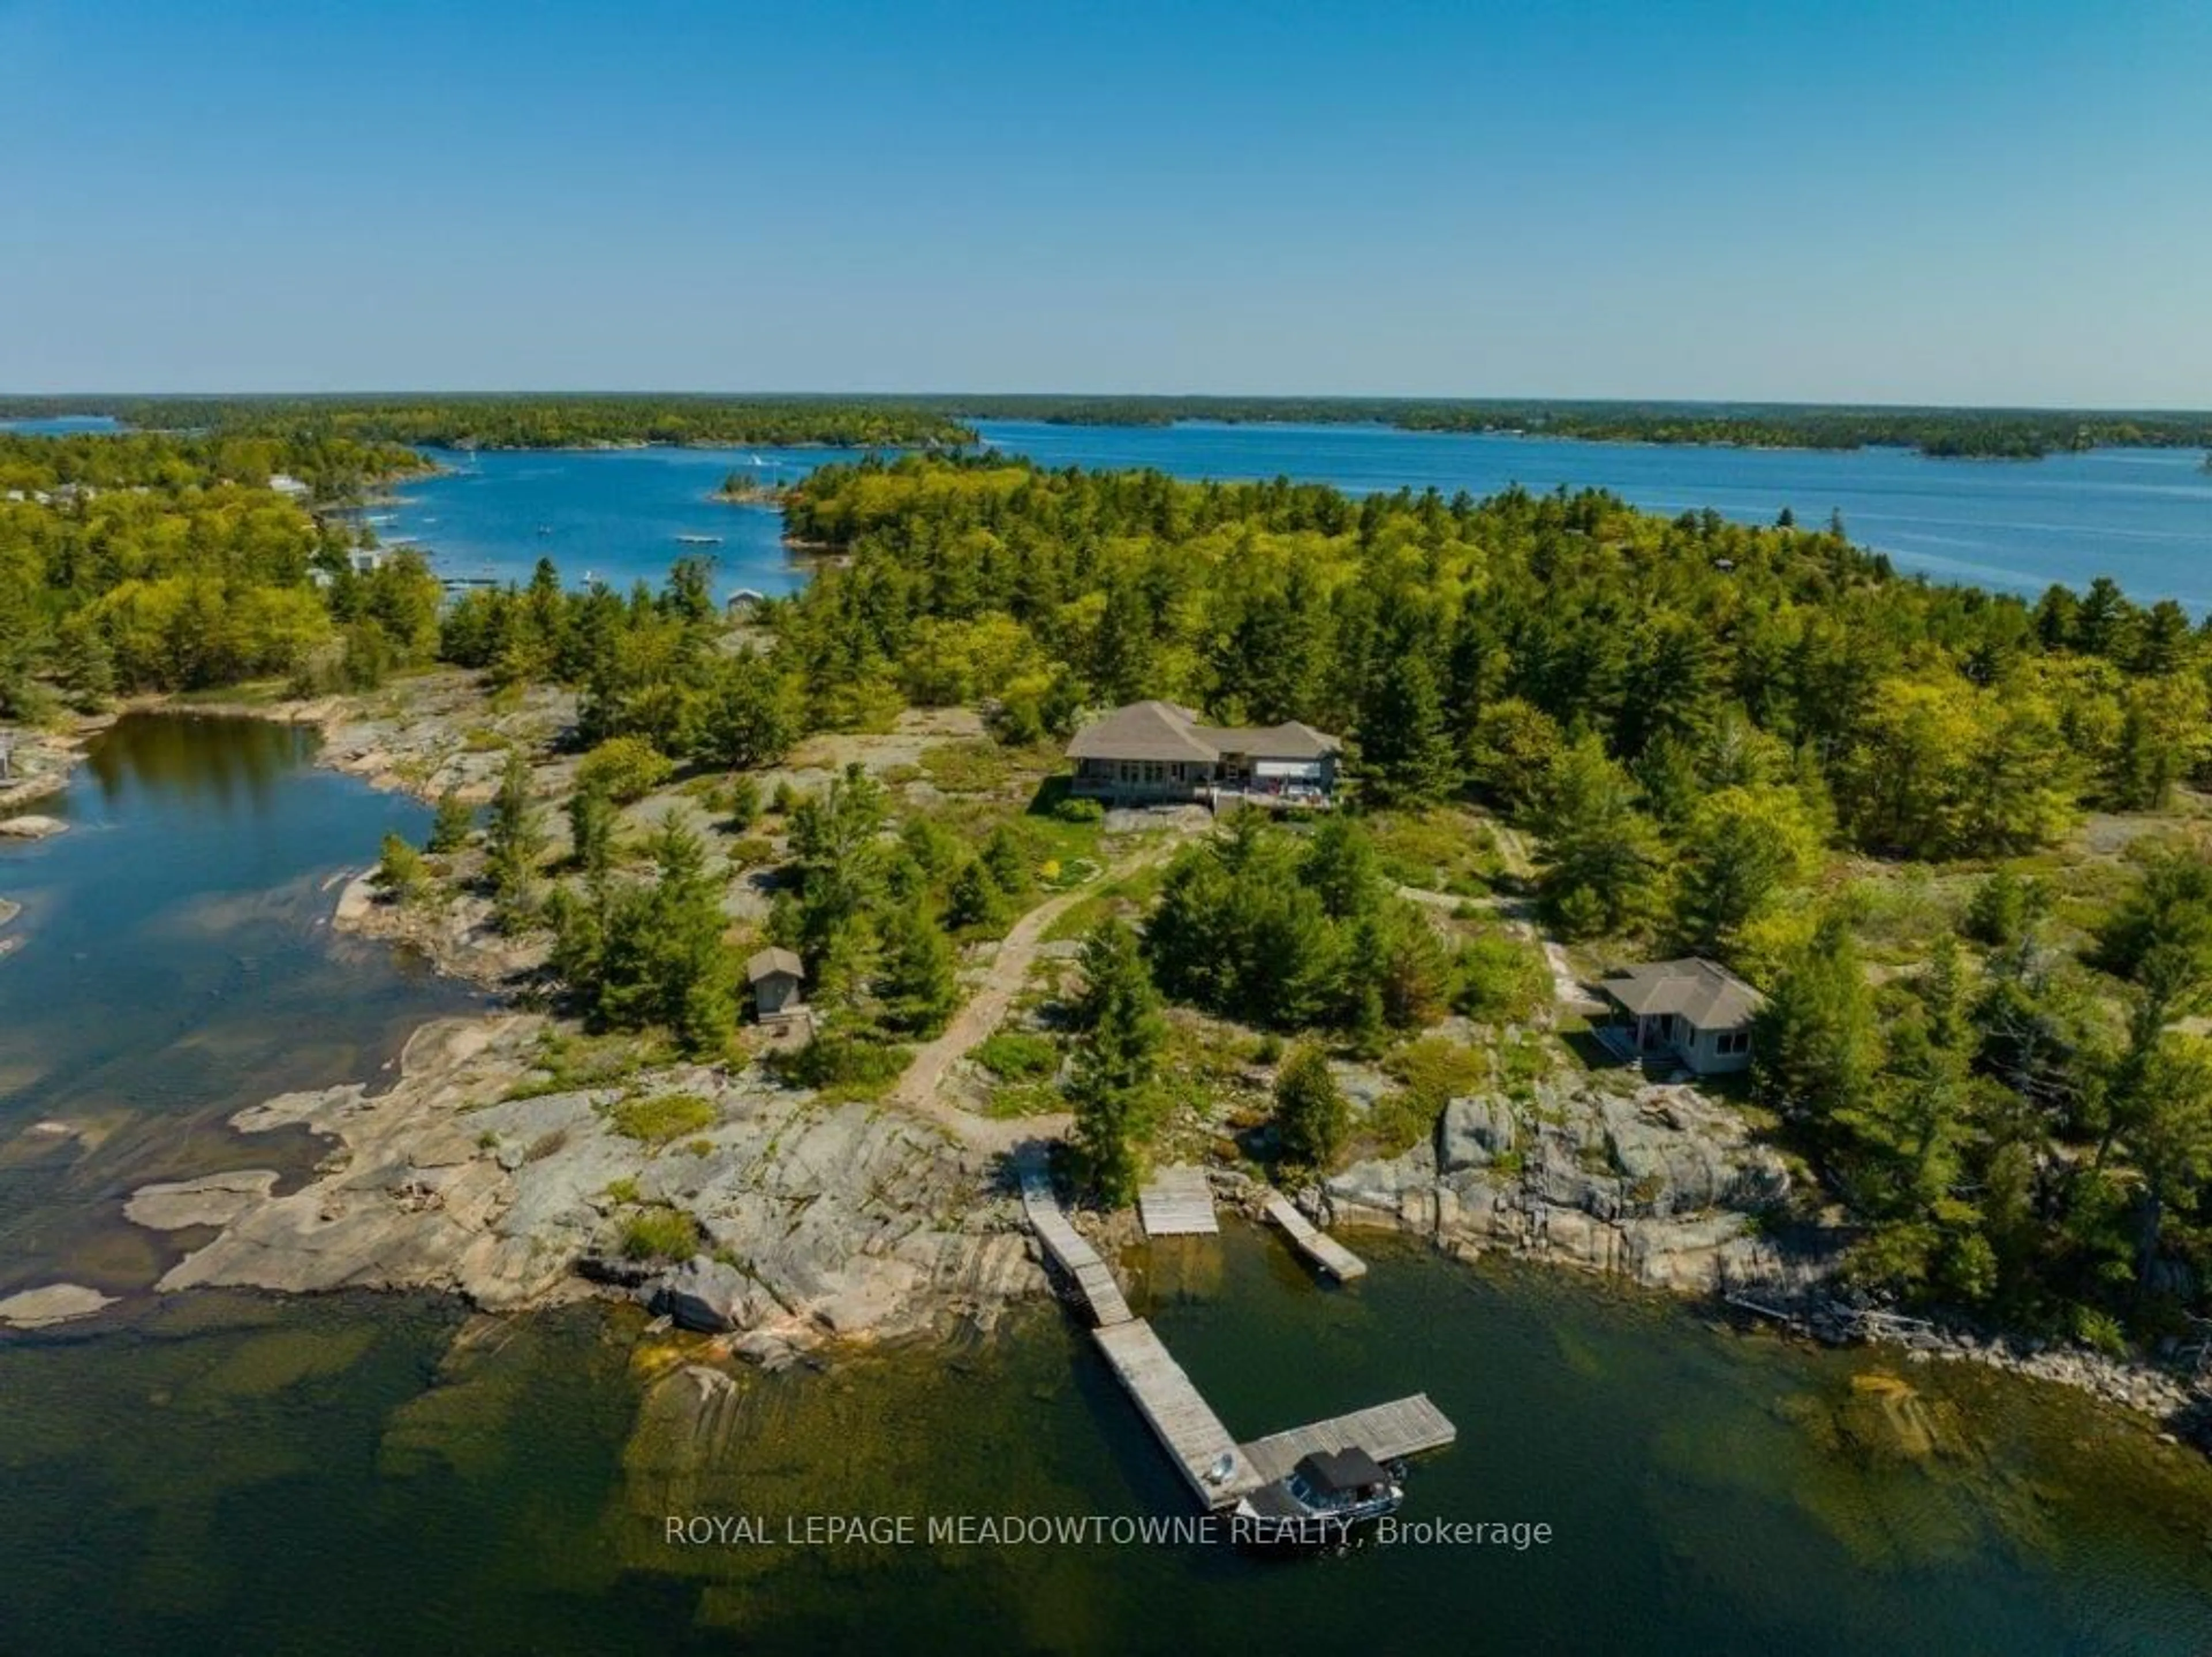 Lakeview for 65 B321 Pt. Frying Pan Island, The Archipelago Ontario P2A 1T4